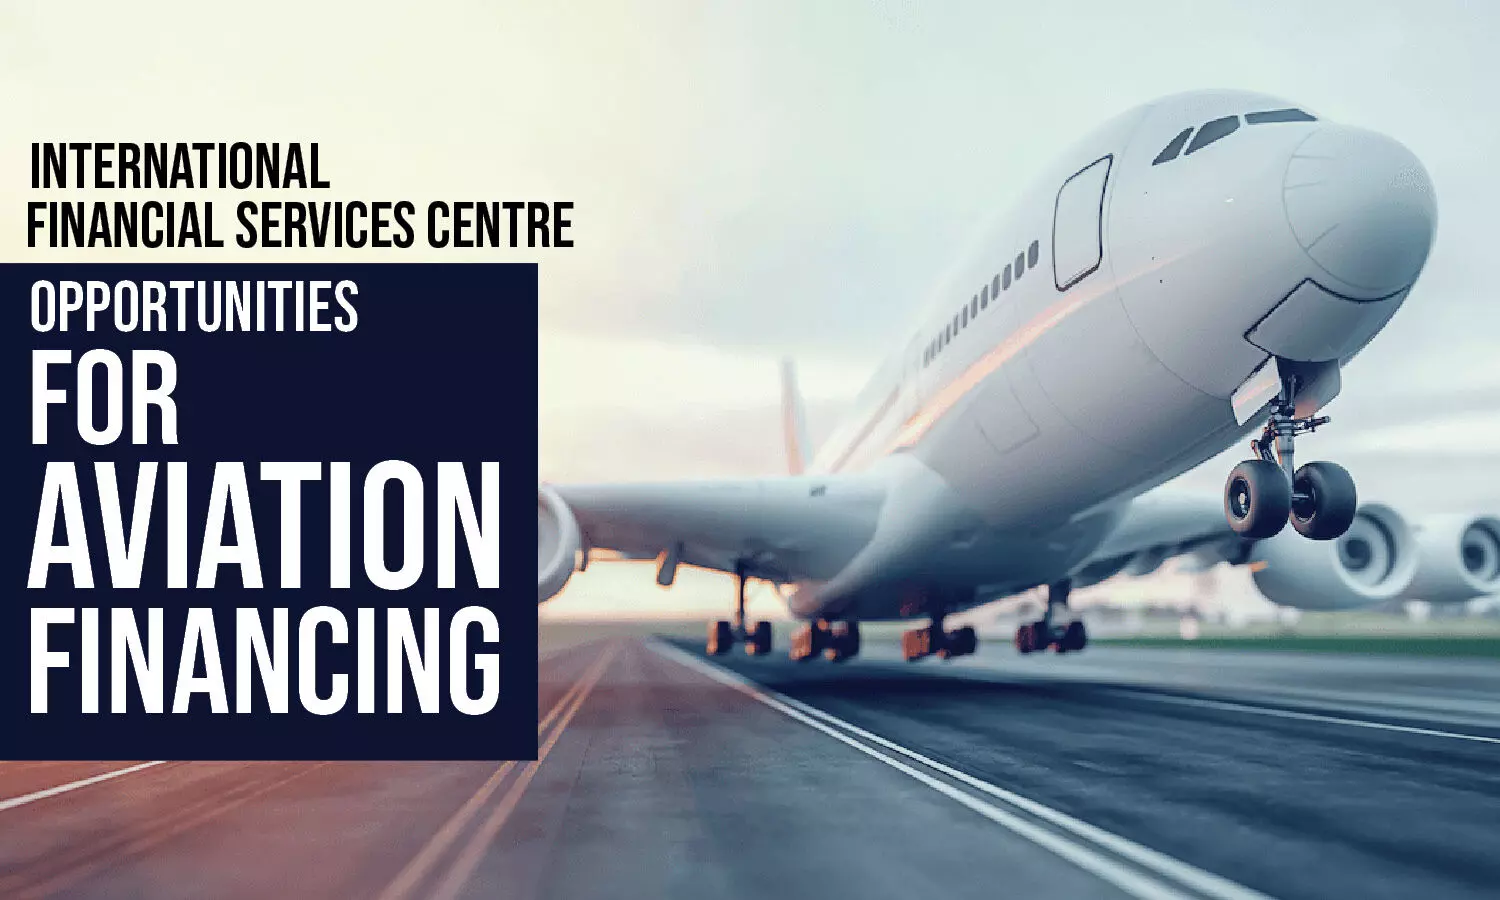 International Financial Services Centre Opportunities for Aviation Financing